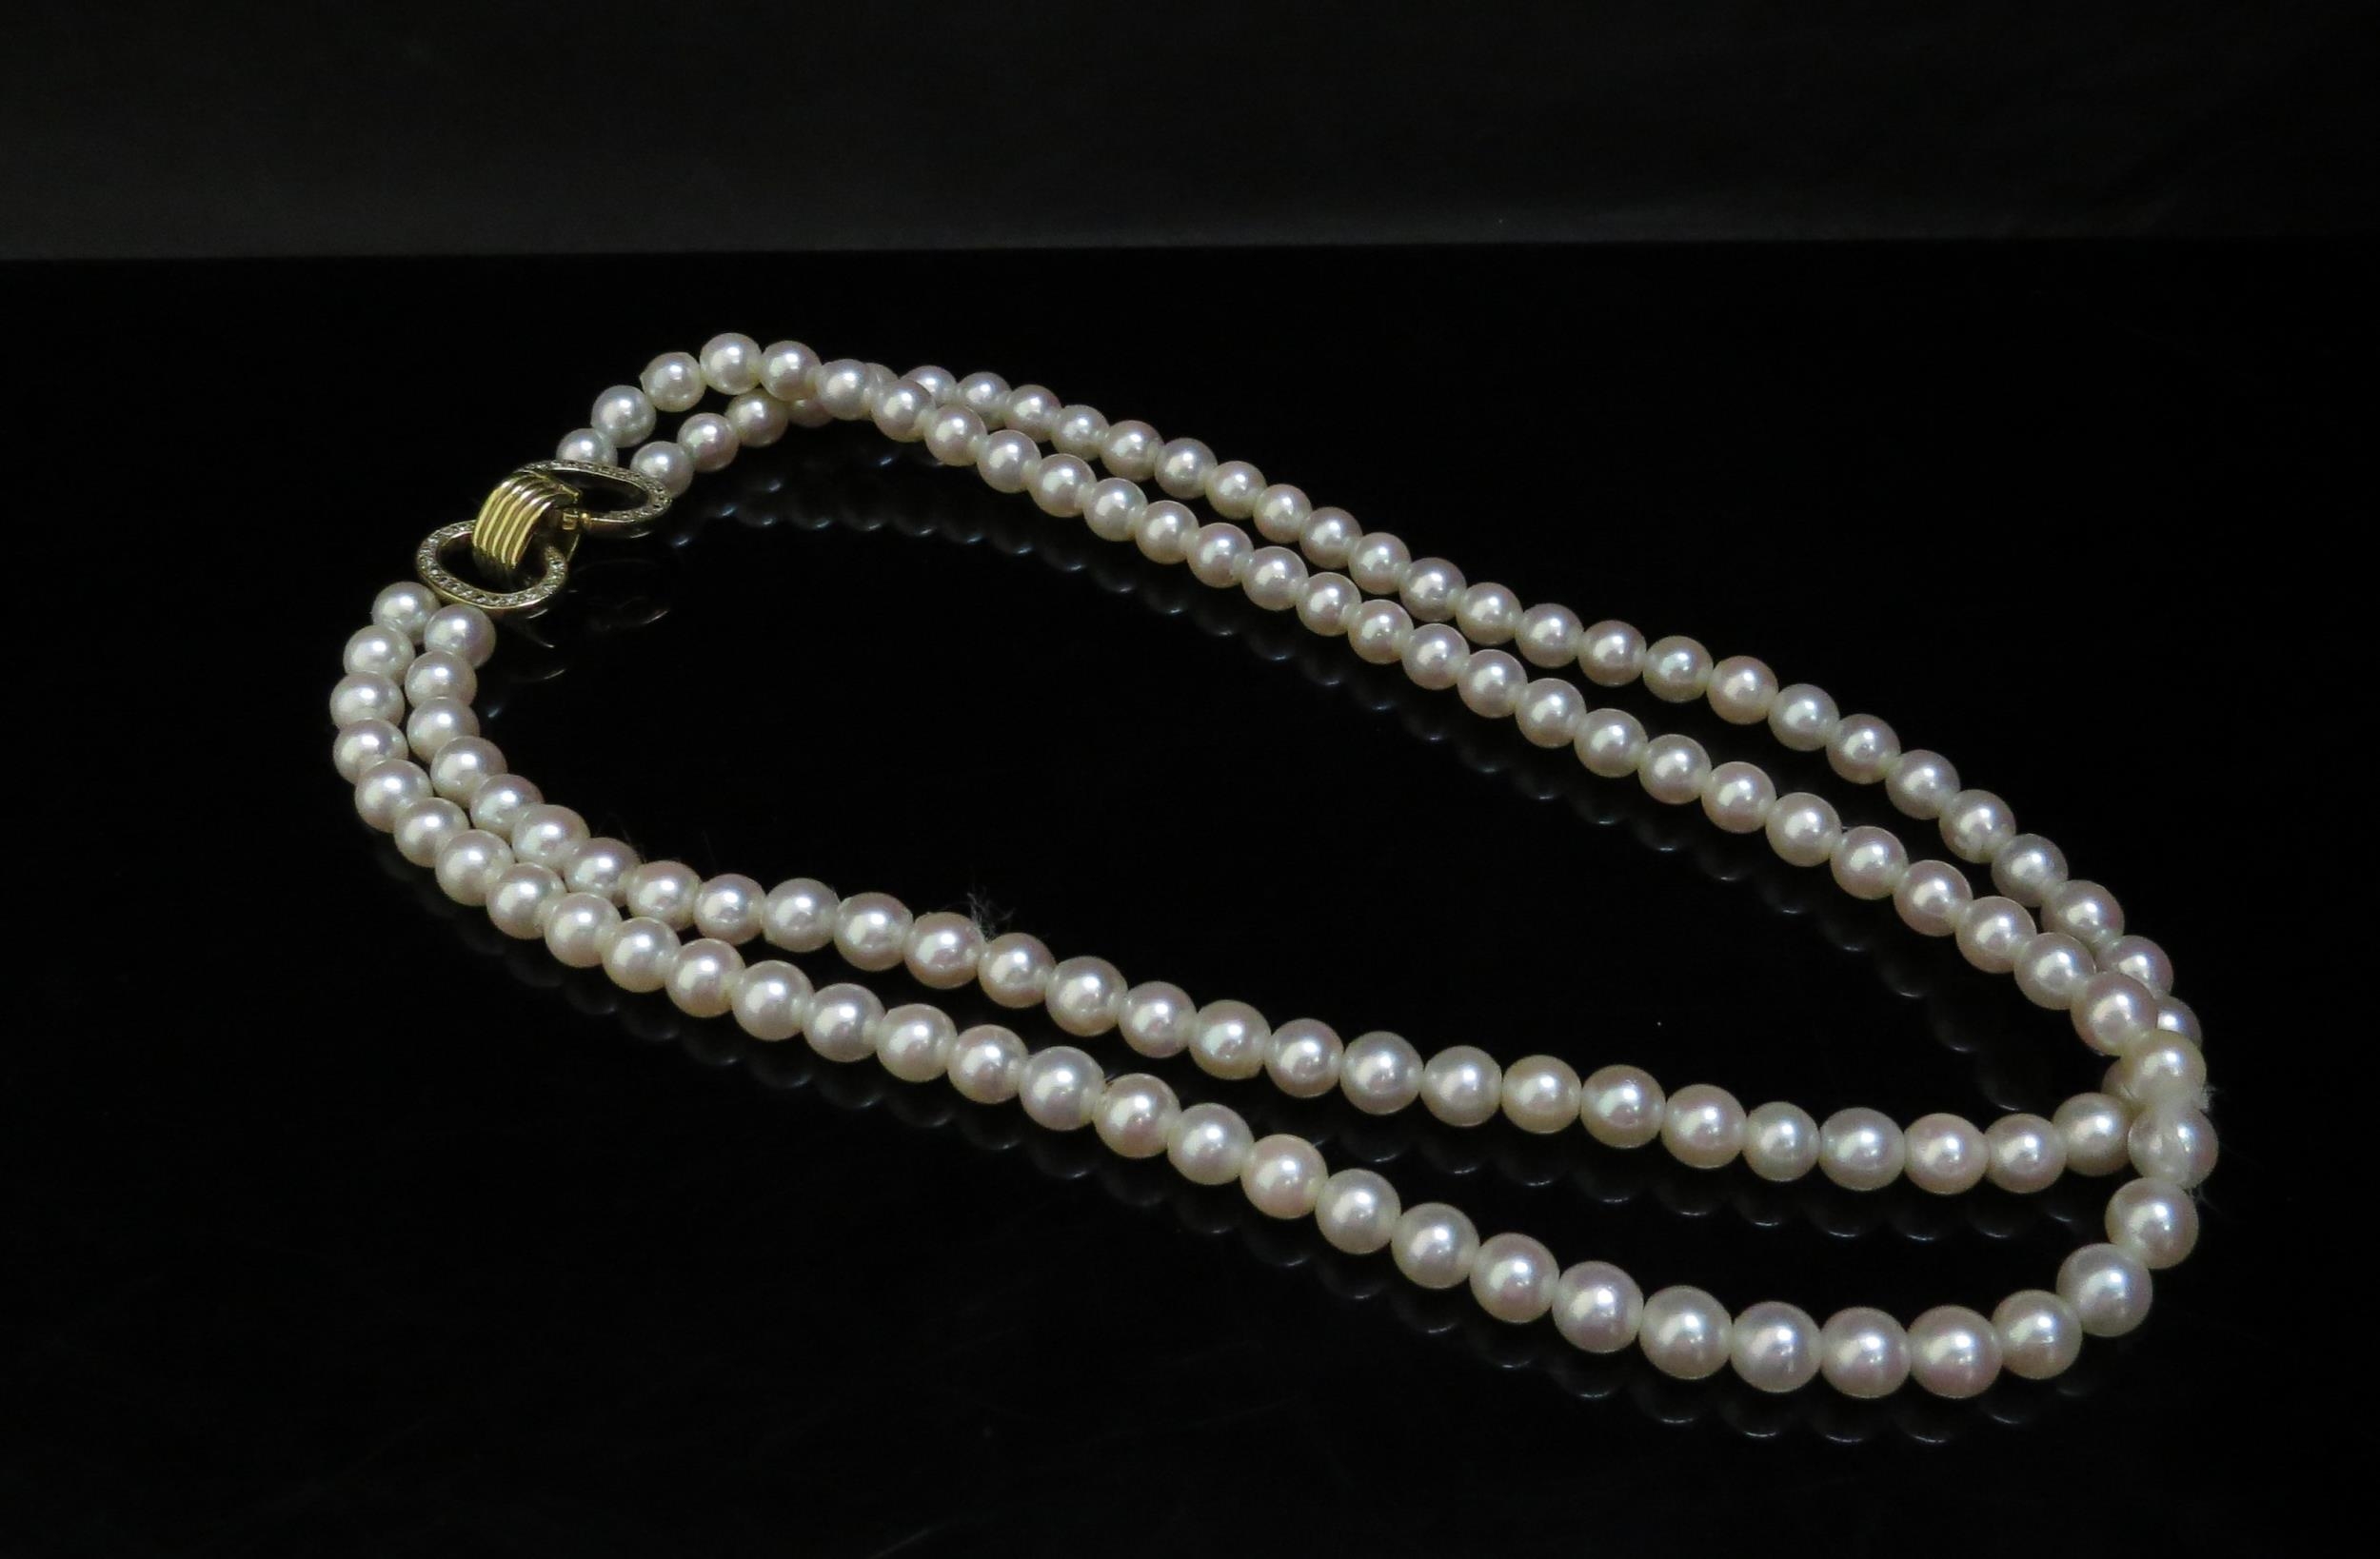 A double stranded pearl necklace 19cm long, diamond encrusted clasp, 42cm long